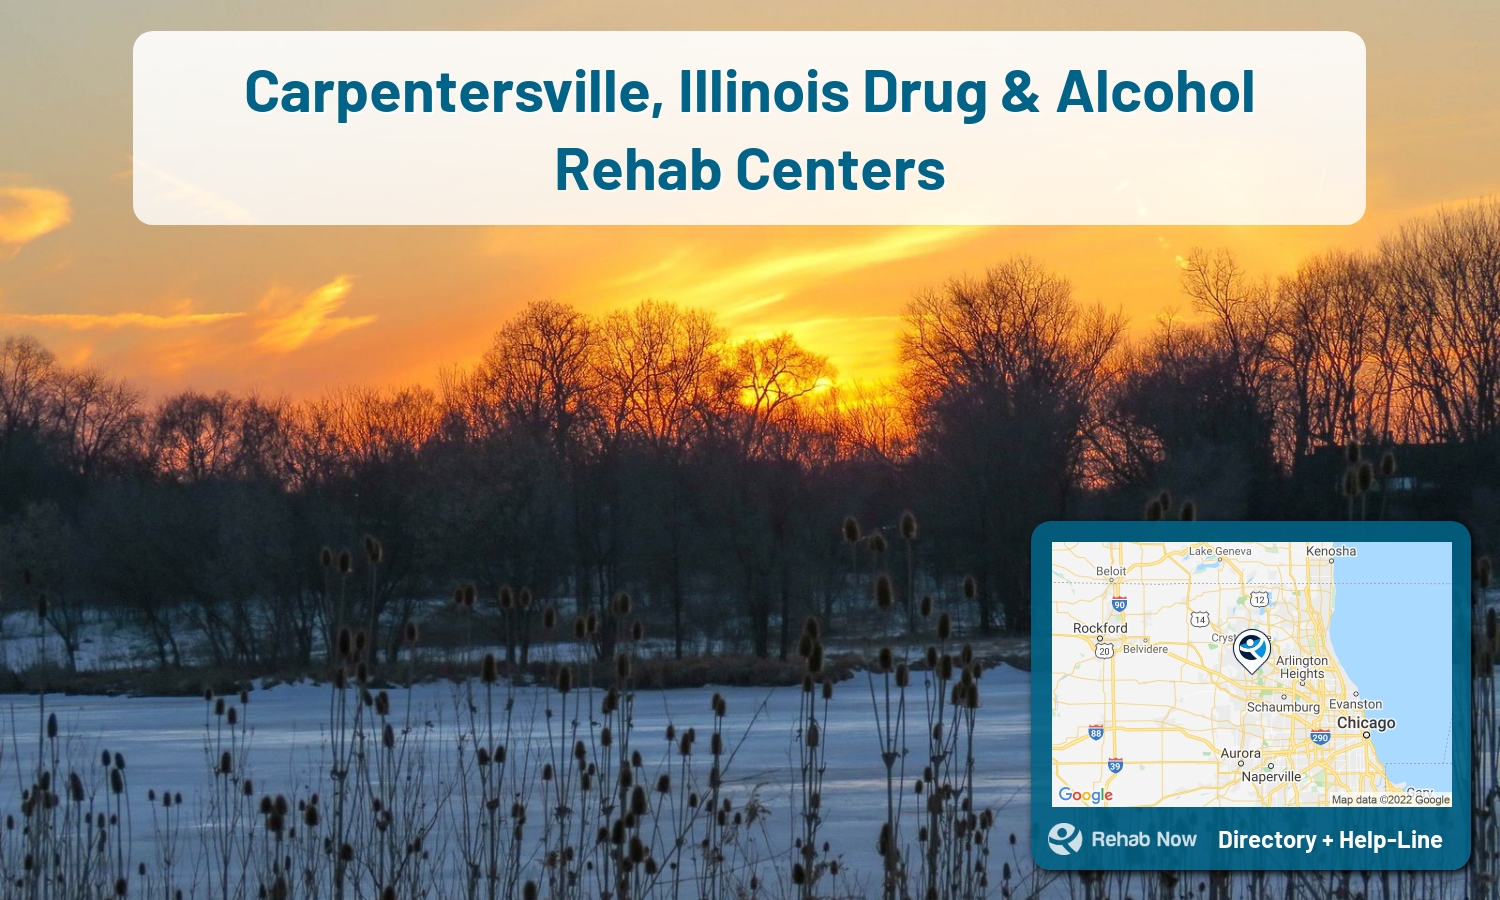 Drug rehab and alcohol treatment services nearby Carpentersville, IL. Need help choosing a treatment program? Call our free hotline!